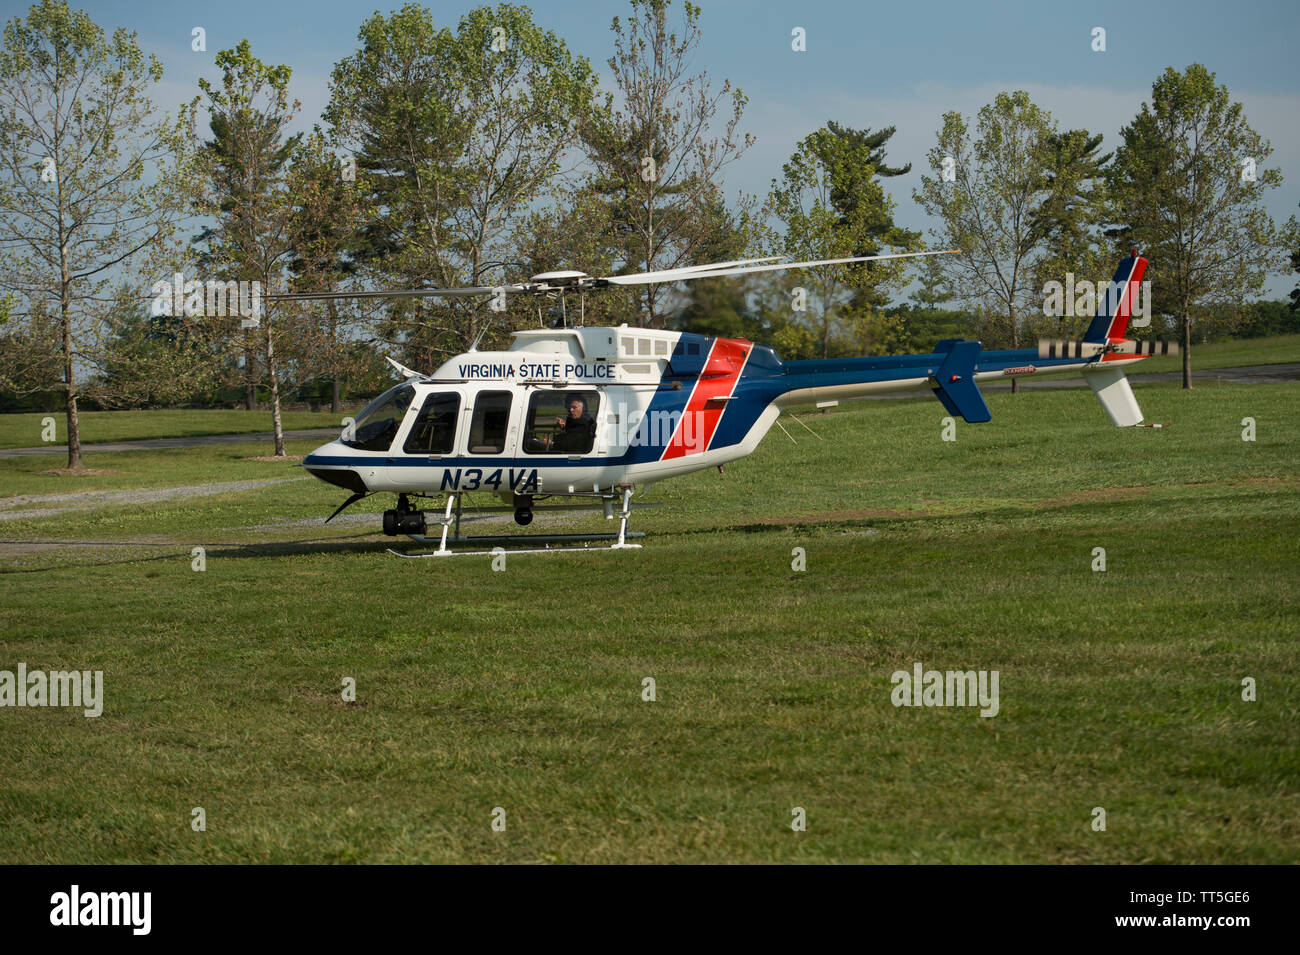 UNITED STATES - May 24, 2016: Governor Terry McAuliffe arrives in a Virginia State Police helicopter at Blandy Experimental Farm in Boyce Virginia tod Stock Photo